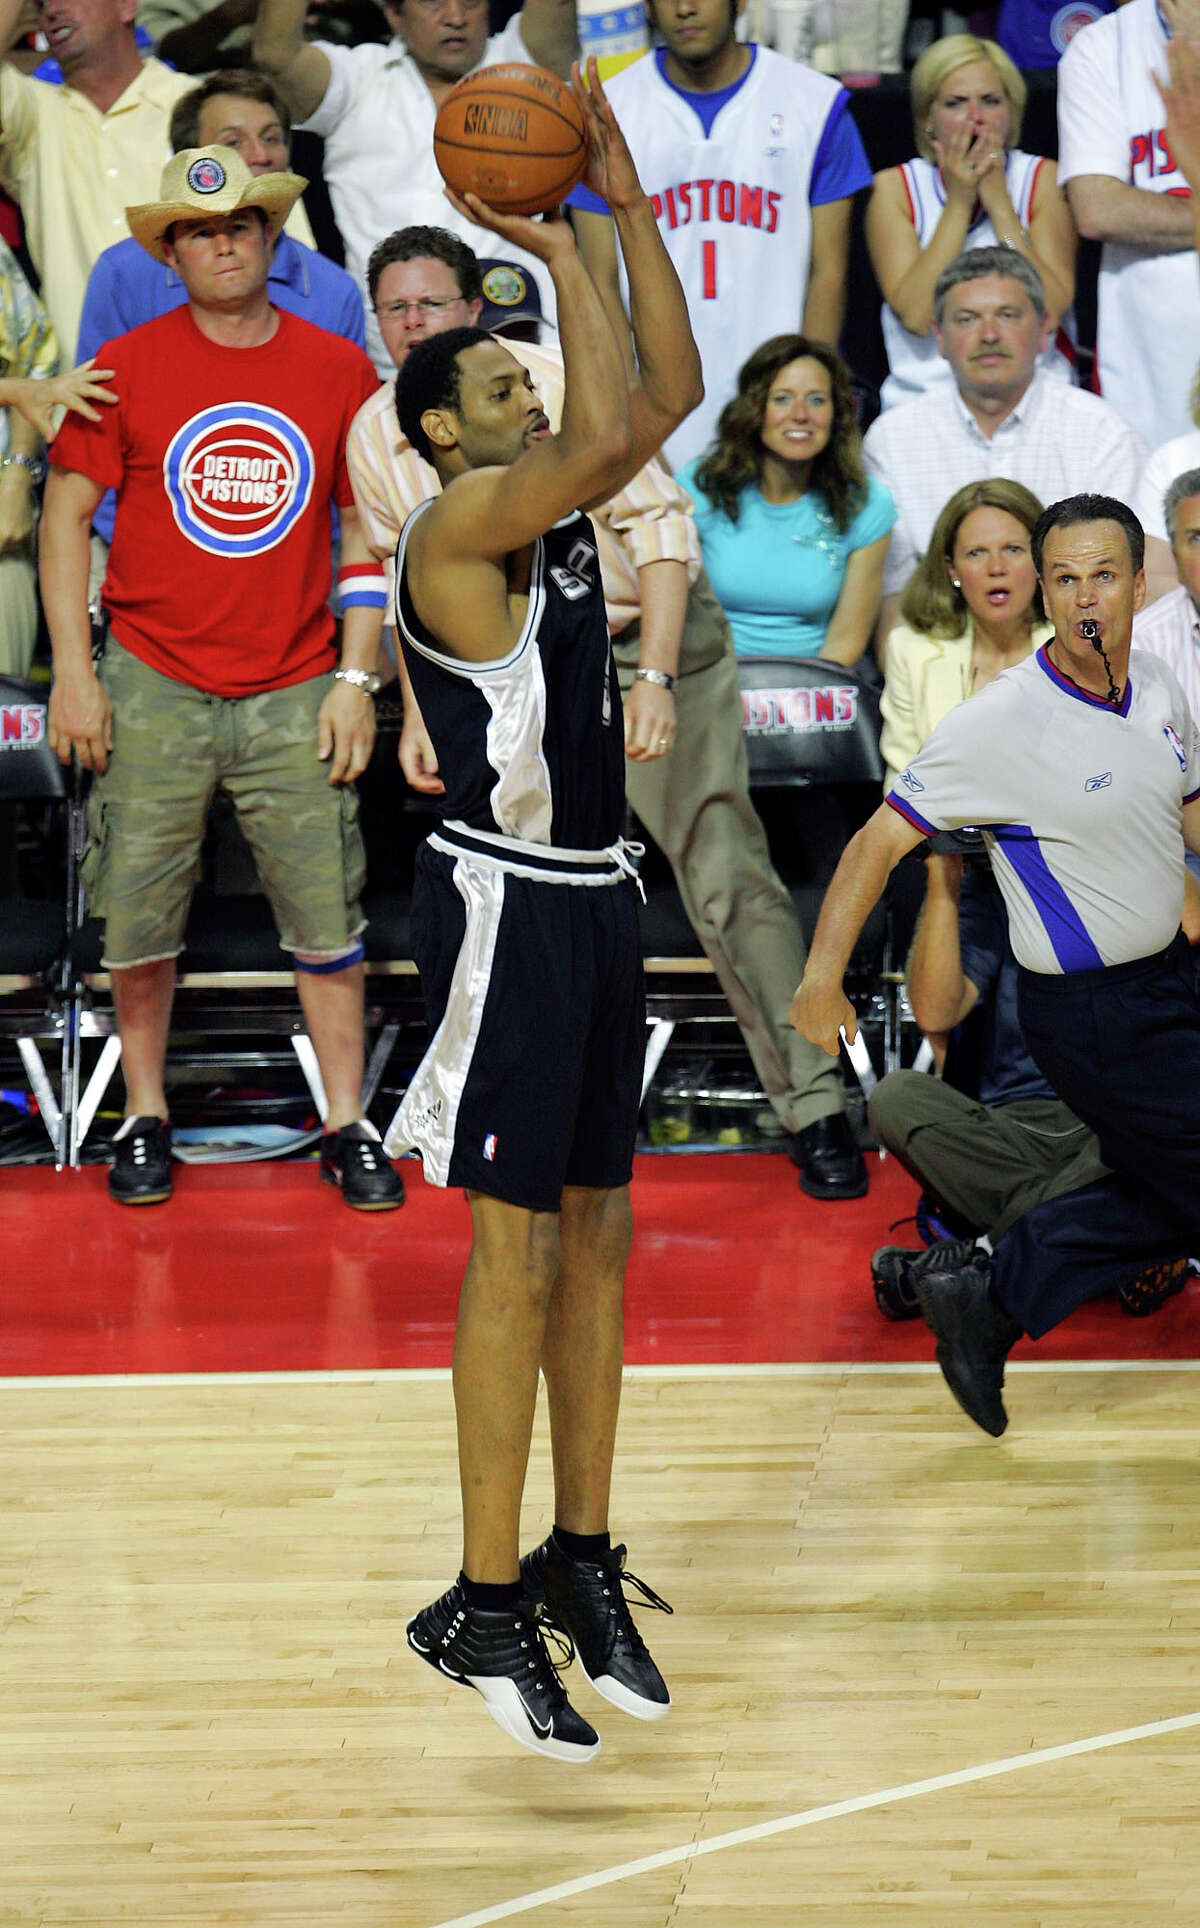 Spurs’ Robert Horry gets set to launch the game-winning 3-point shot during overtime of Game 5 of the NBA Finals against the Detroit Pistons at The Palace of Auburn Hills on June 19, 2005.